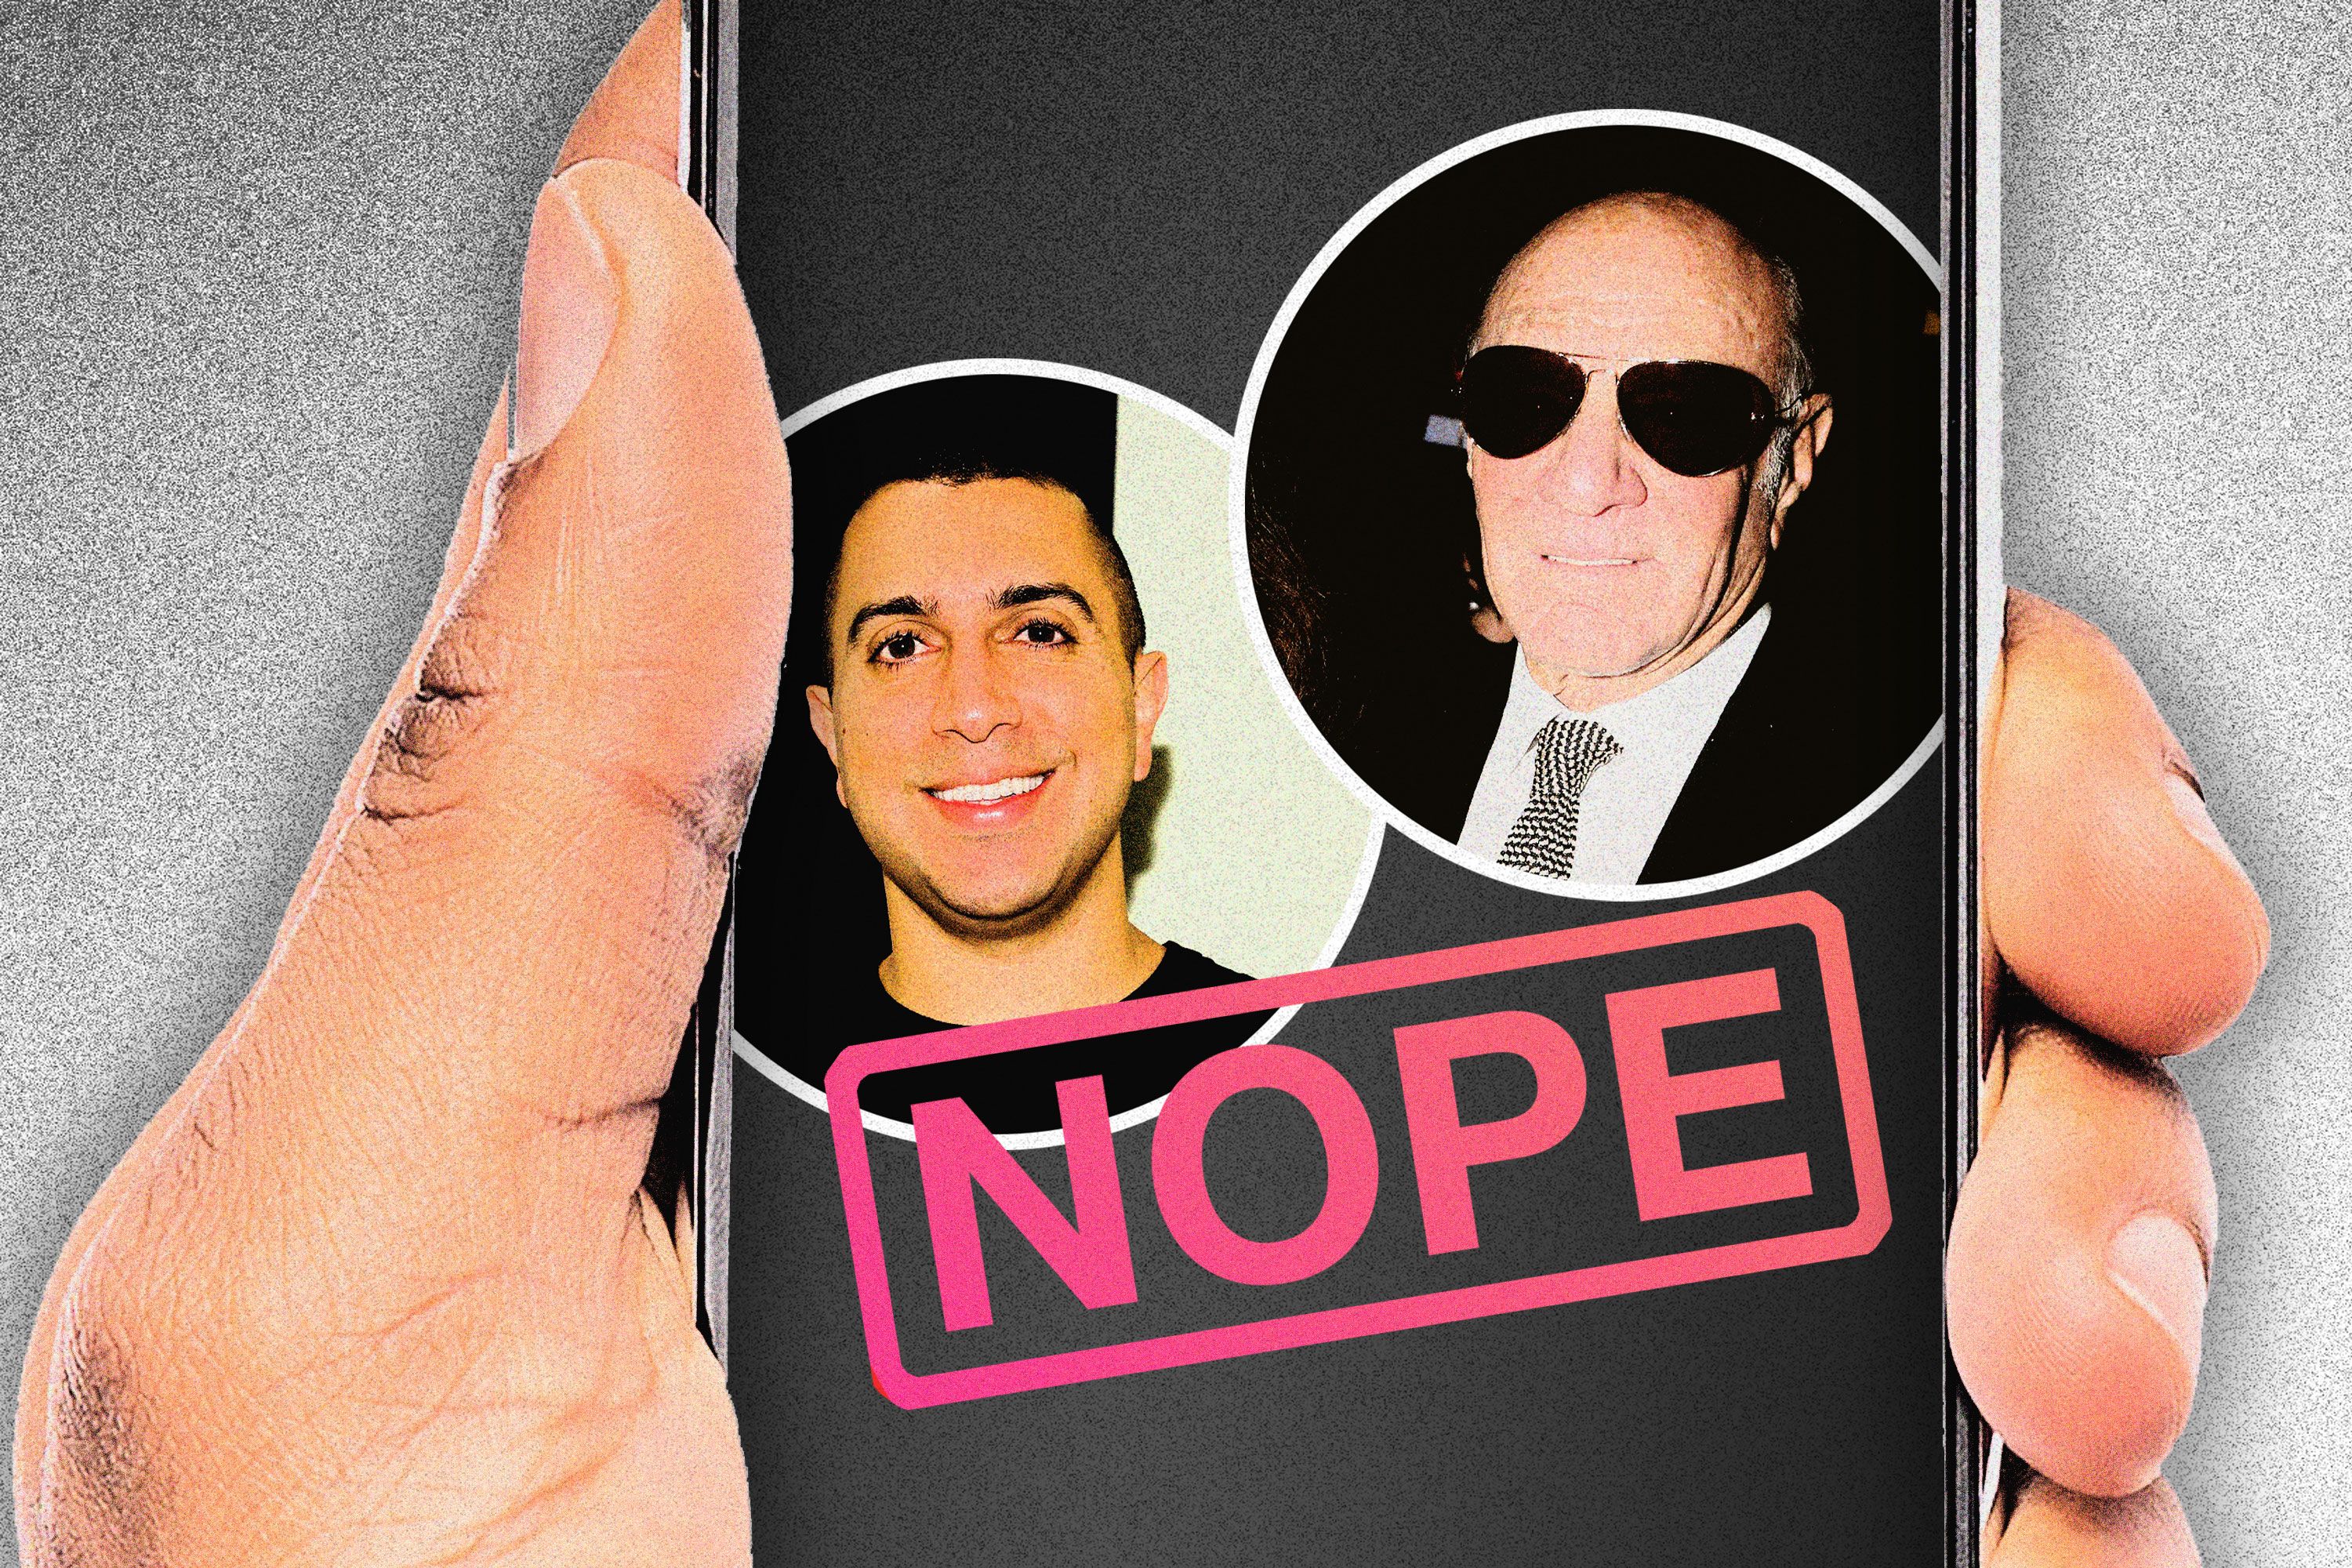 The Tinder Revenge Story Between Sean Rad and Barry Diller image picture